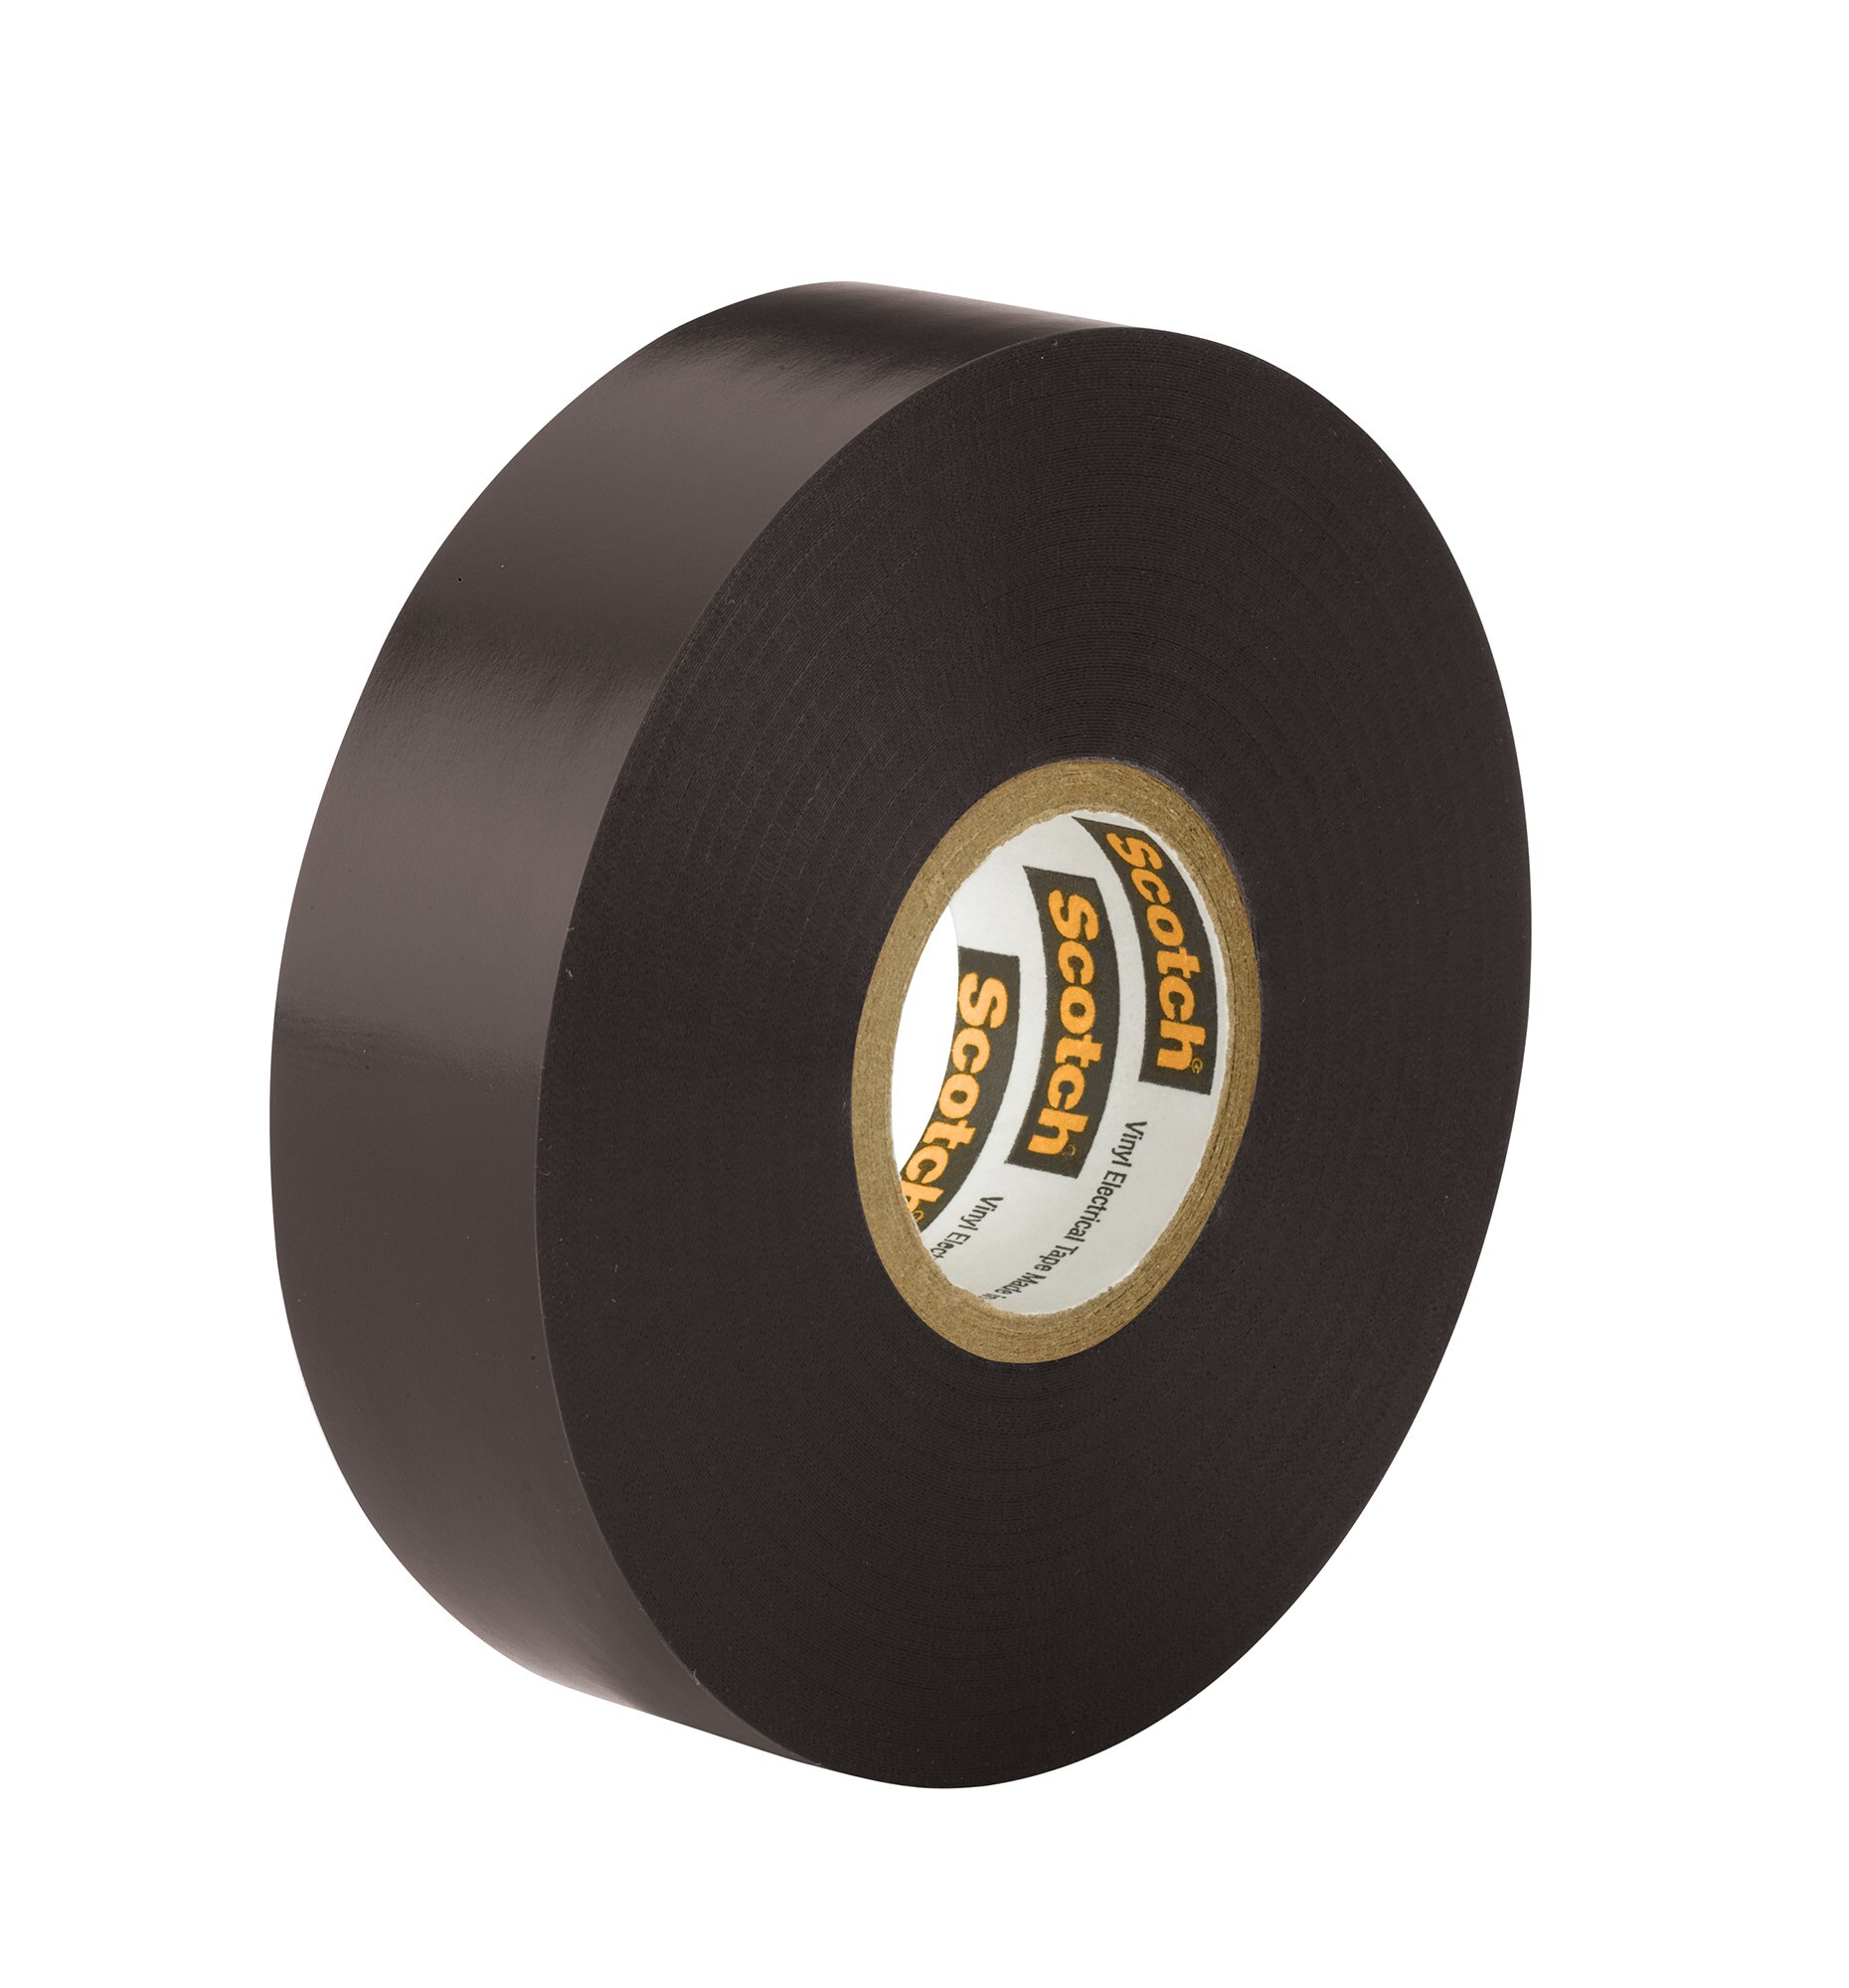 Lot 10 Rolls 21 FT General 3/4" Inch Vinyl PVC Black Insulated Electrical Tape 